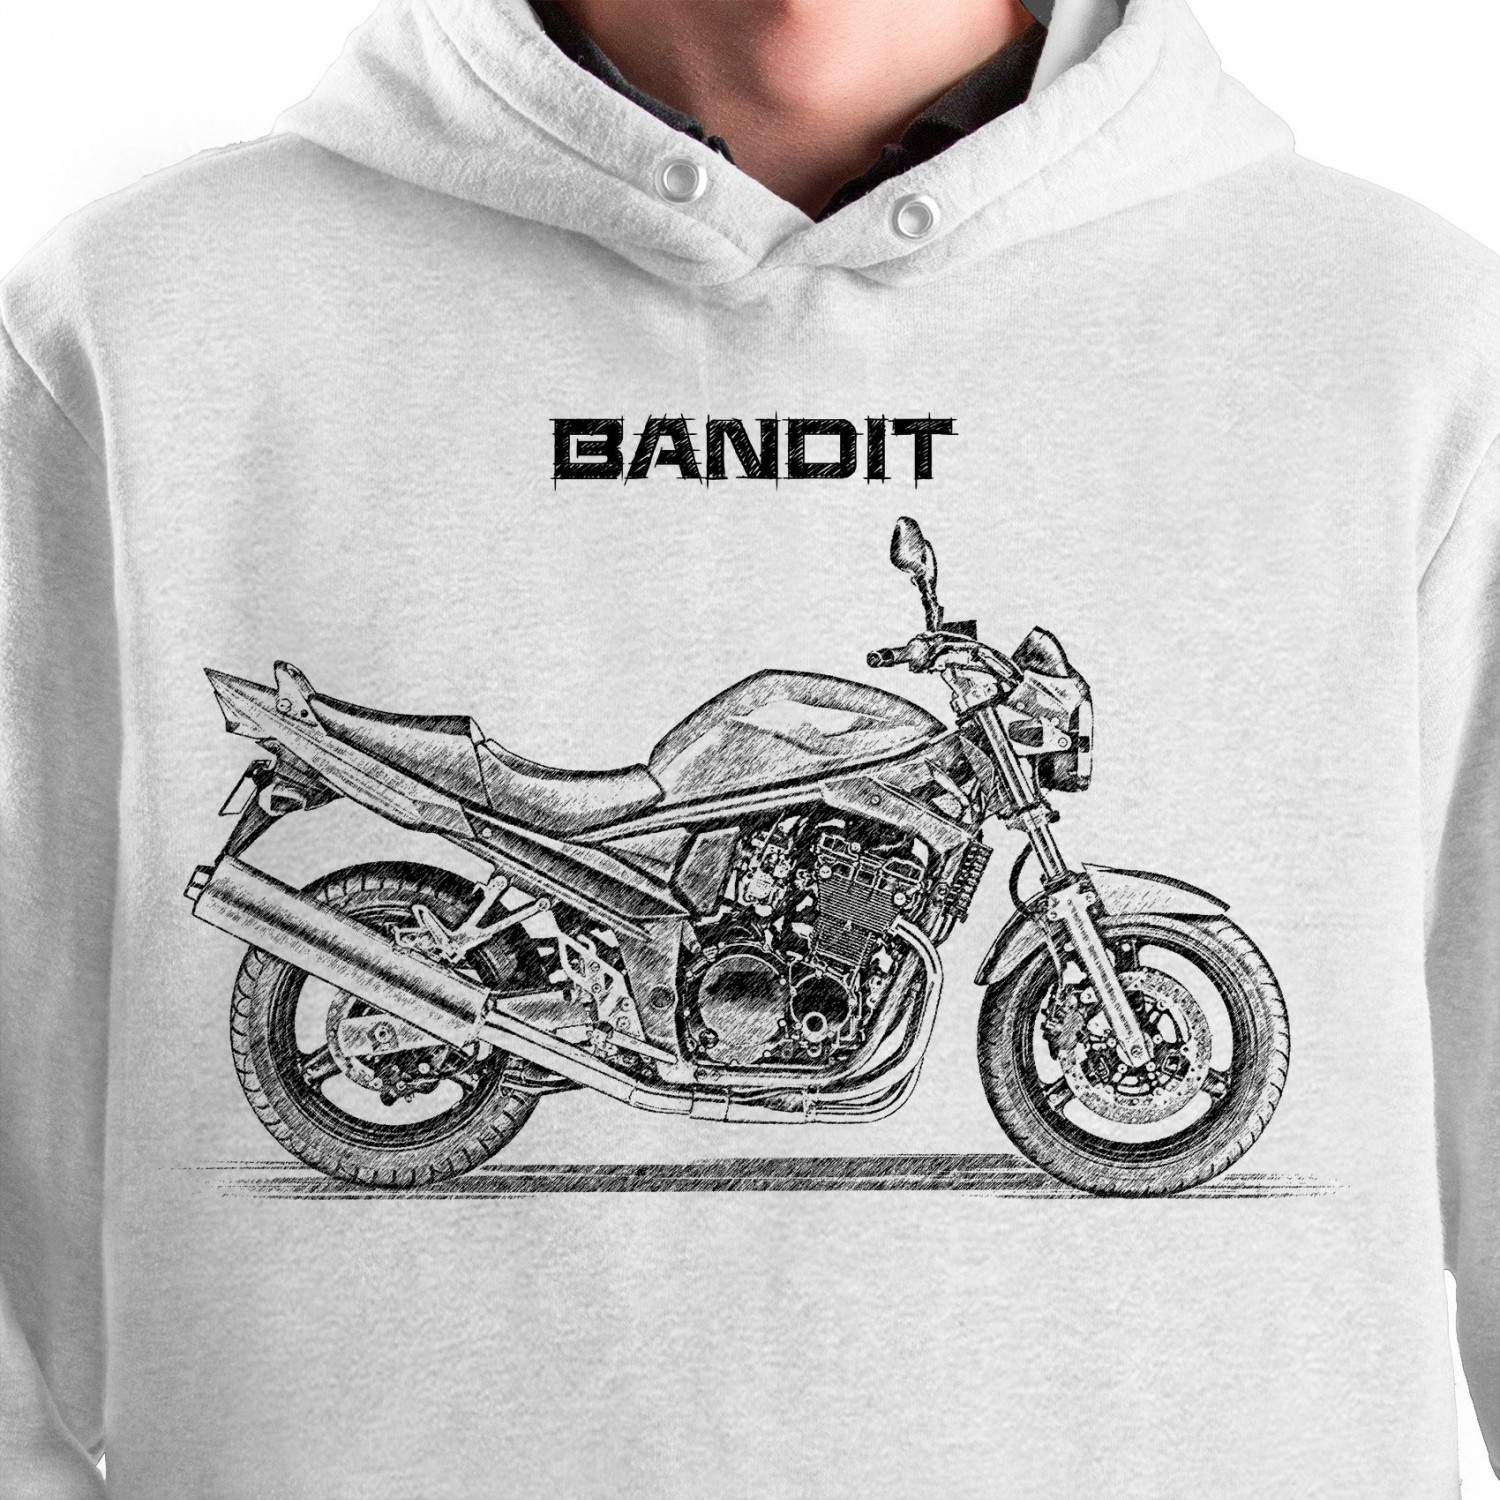 White T-shirt with Suzuki Bandit Naked. Gift for motorcyclist.